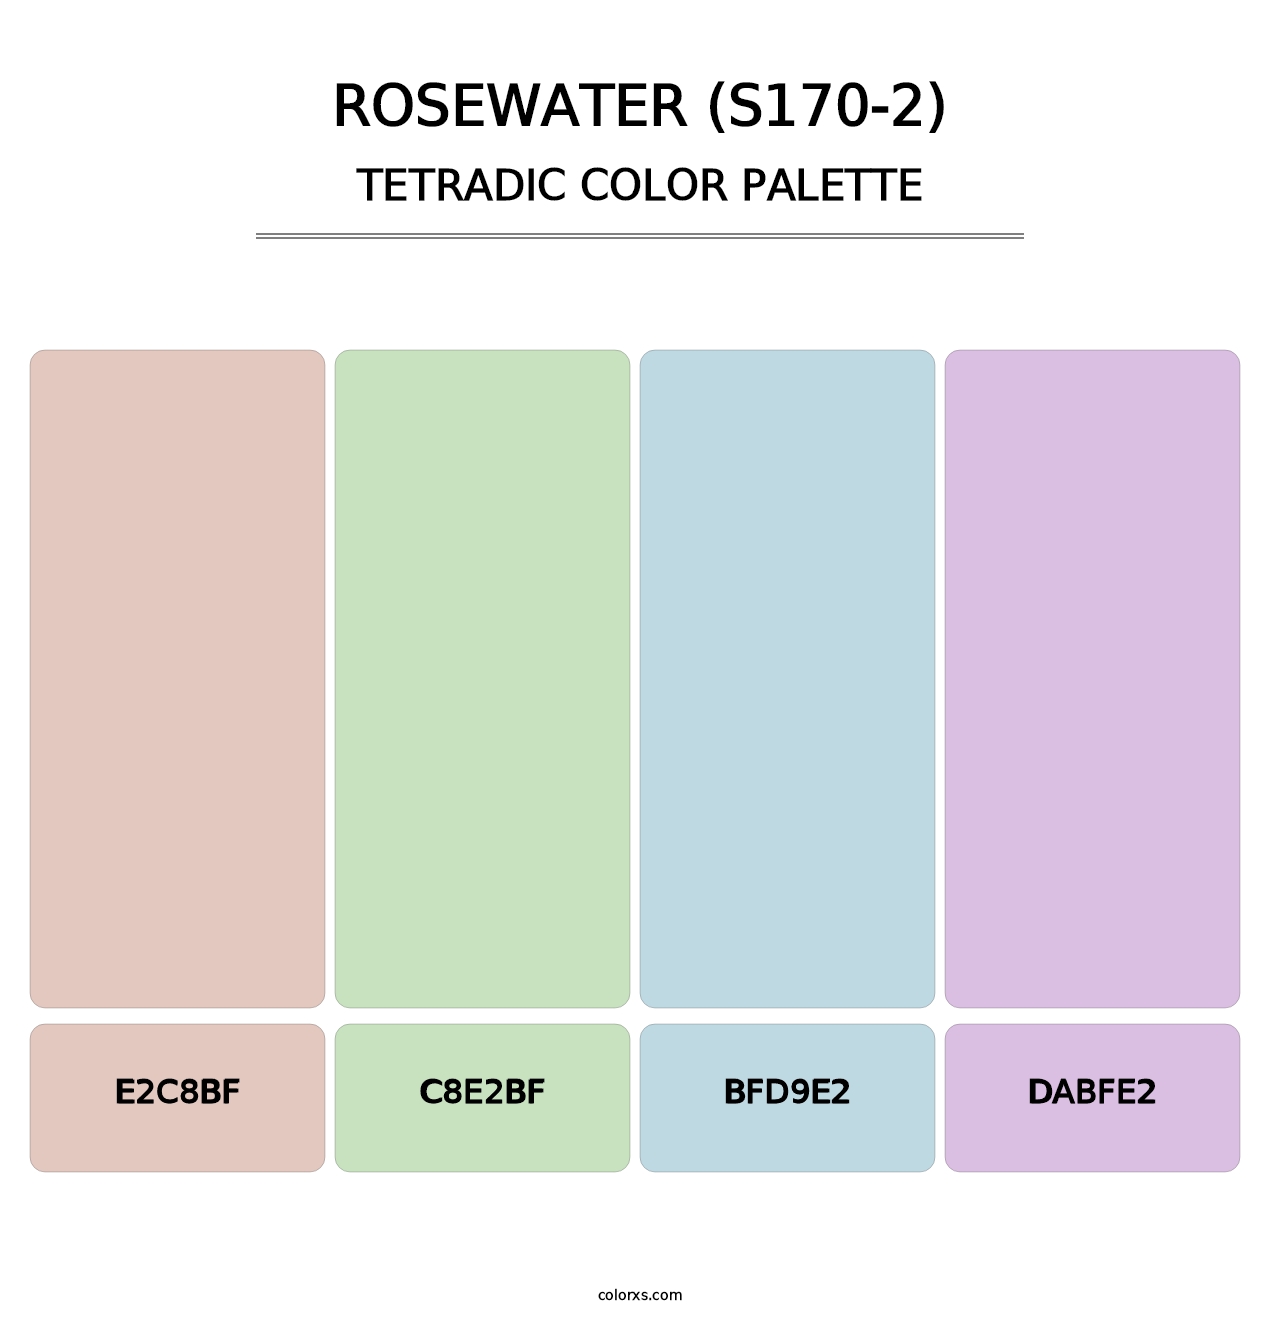 Rosewater (S170-2) - Tetradic Color Palette